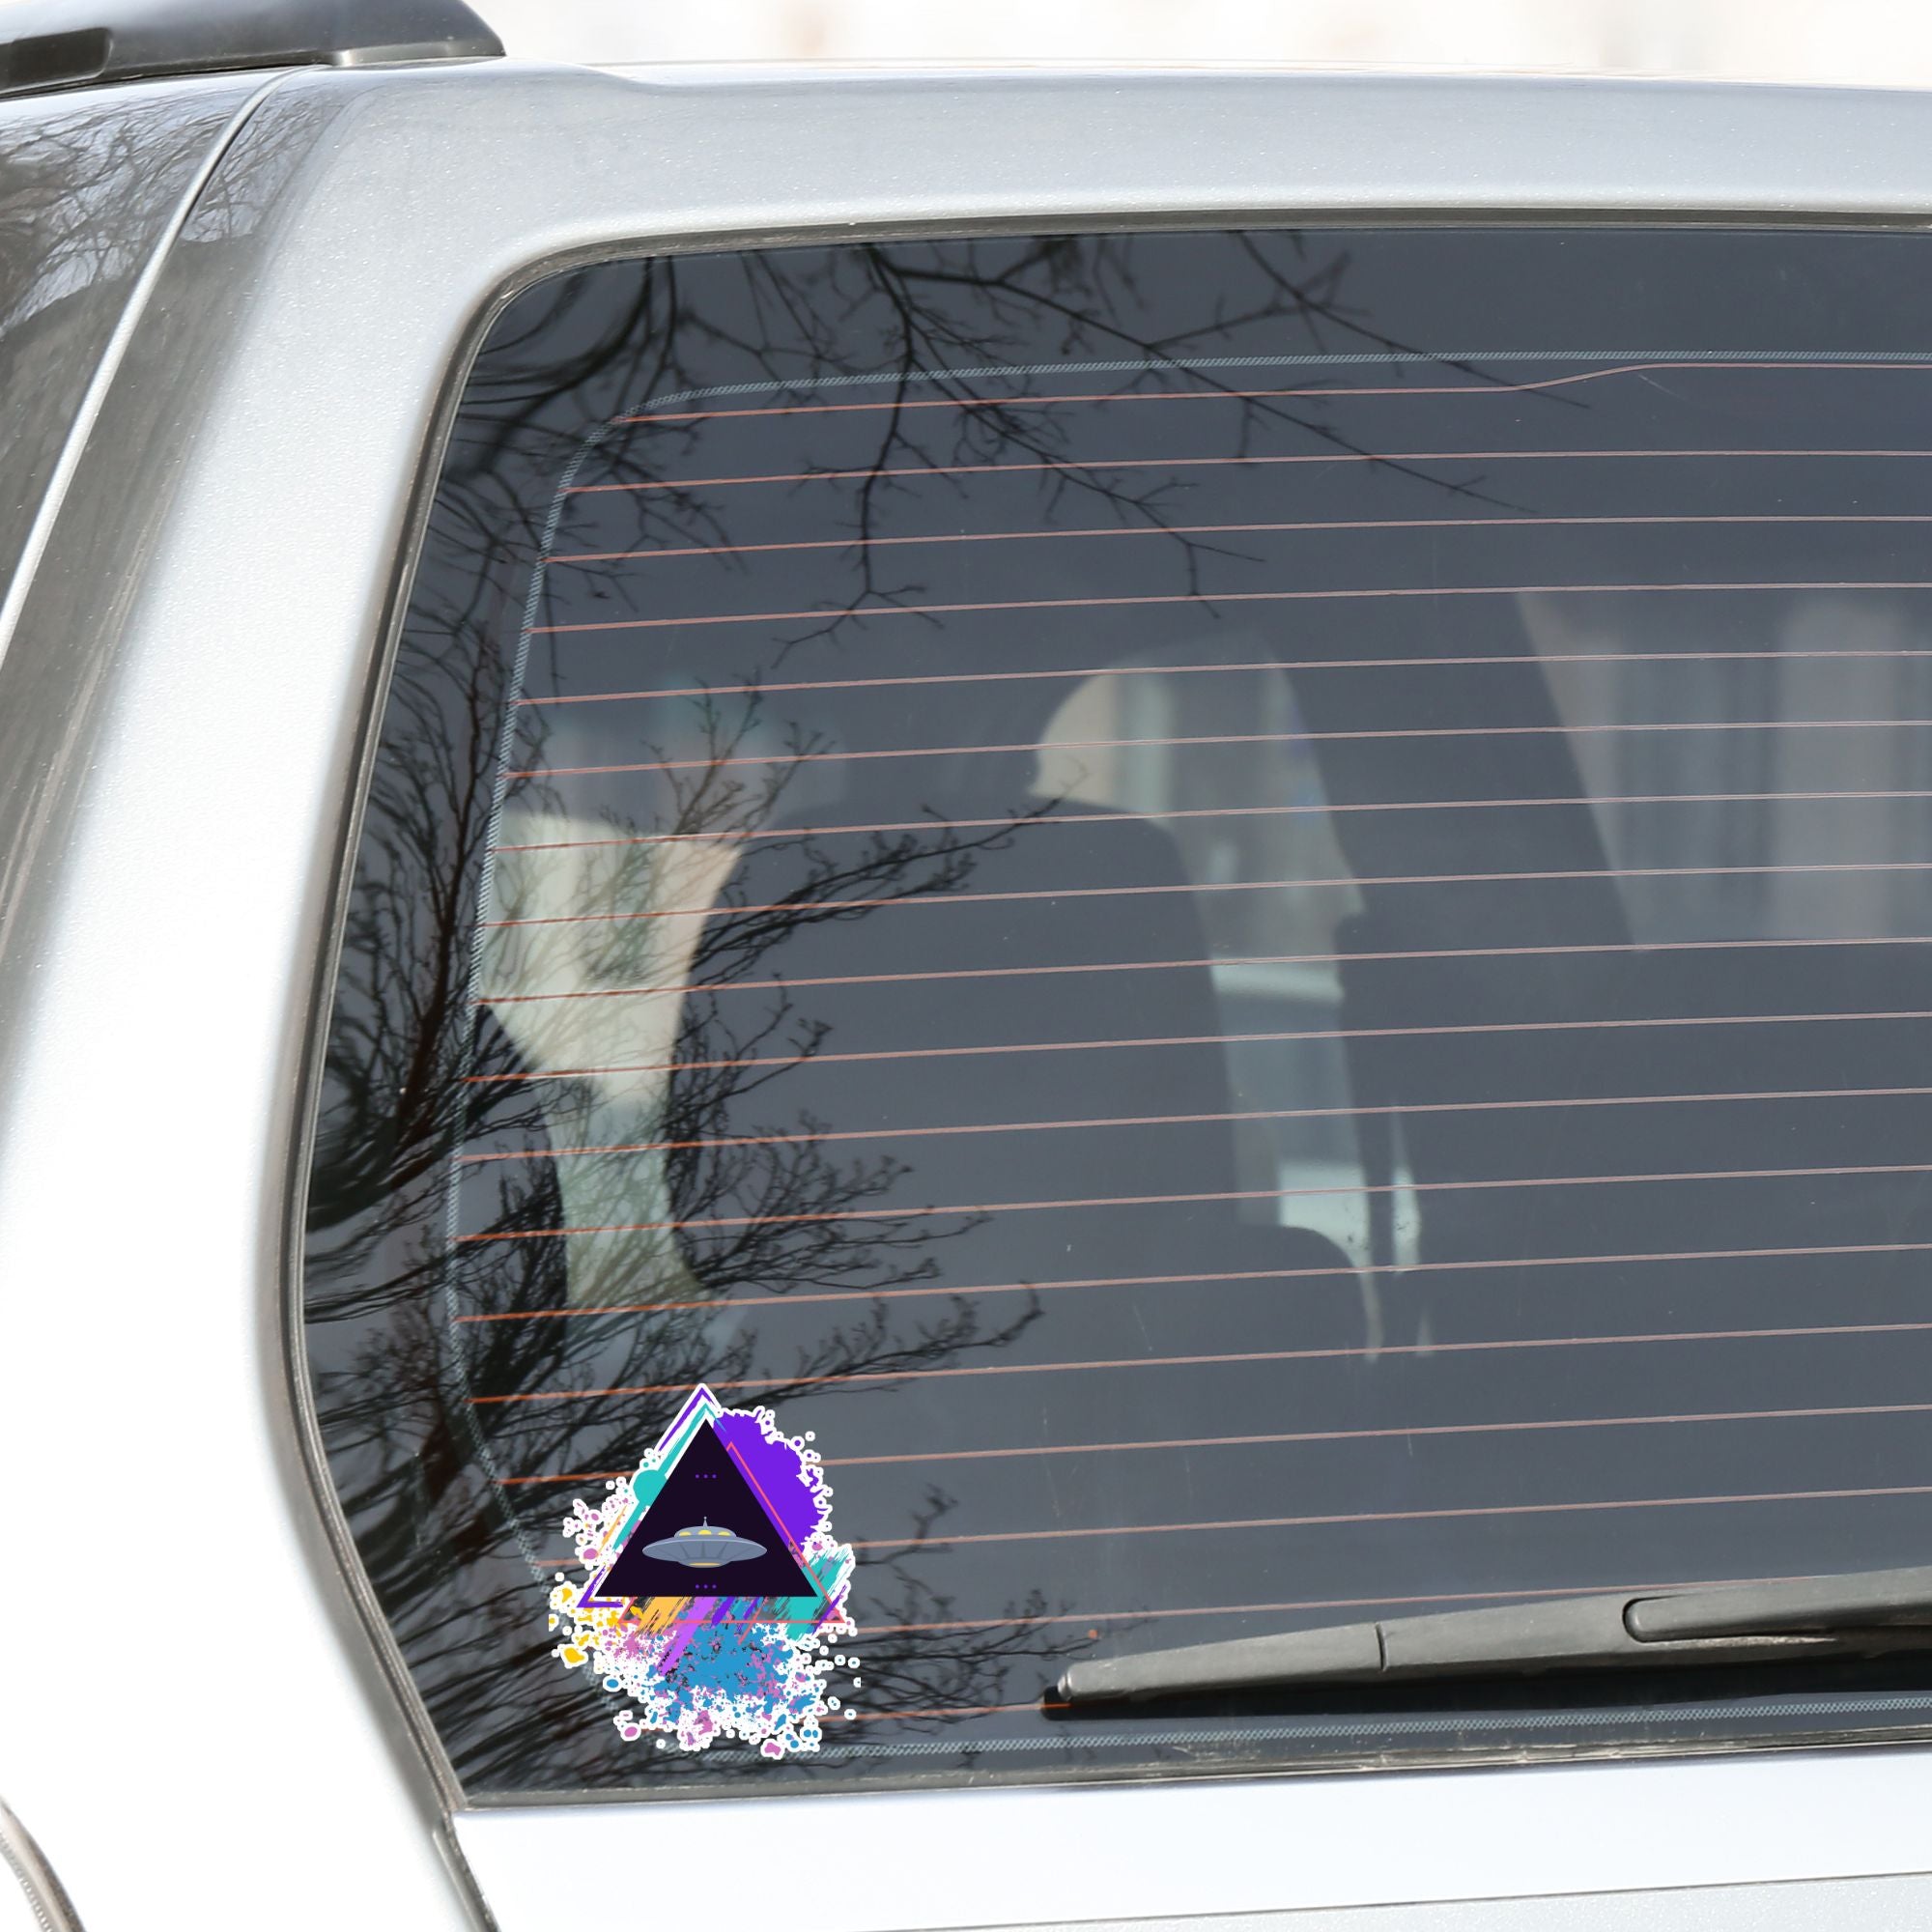 UFO alert! This individual die-cut sticker features an alien spaceship, UFO, on a black triangle background with pastel paint splatters behind. This image shows the alien triangle sticker on the rear window of a car.